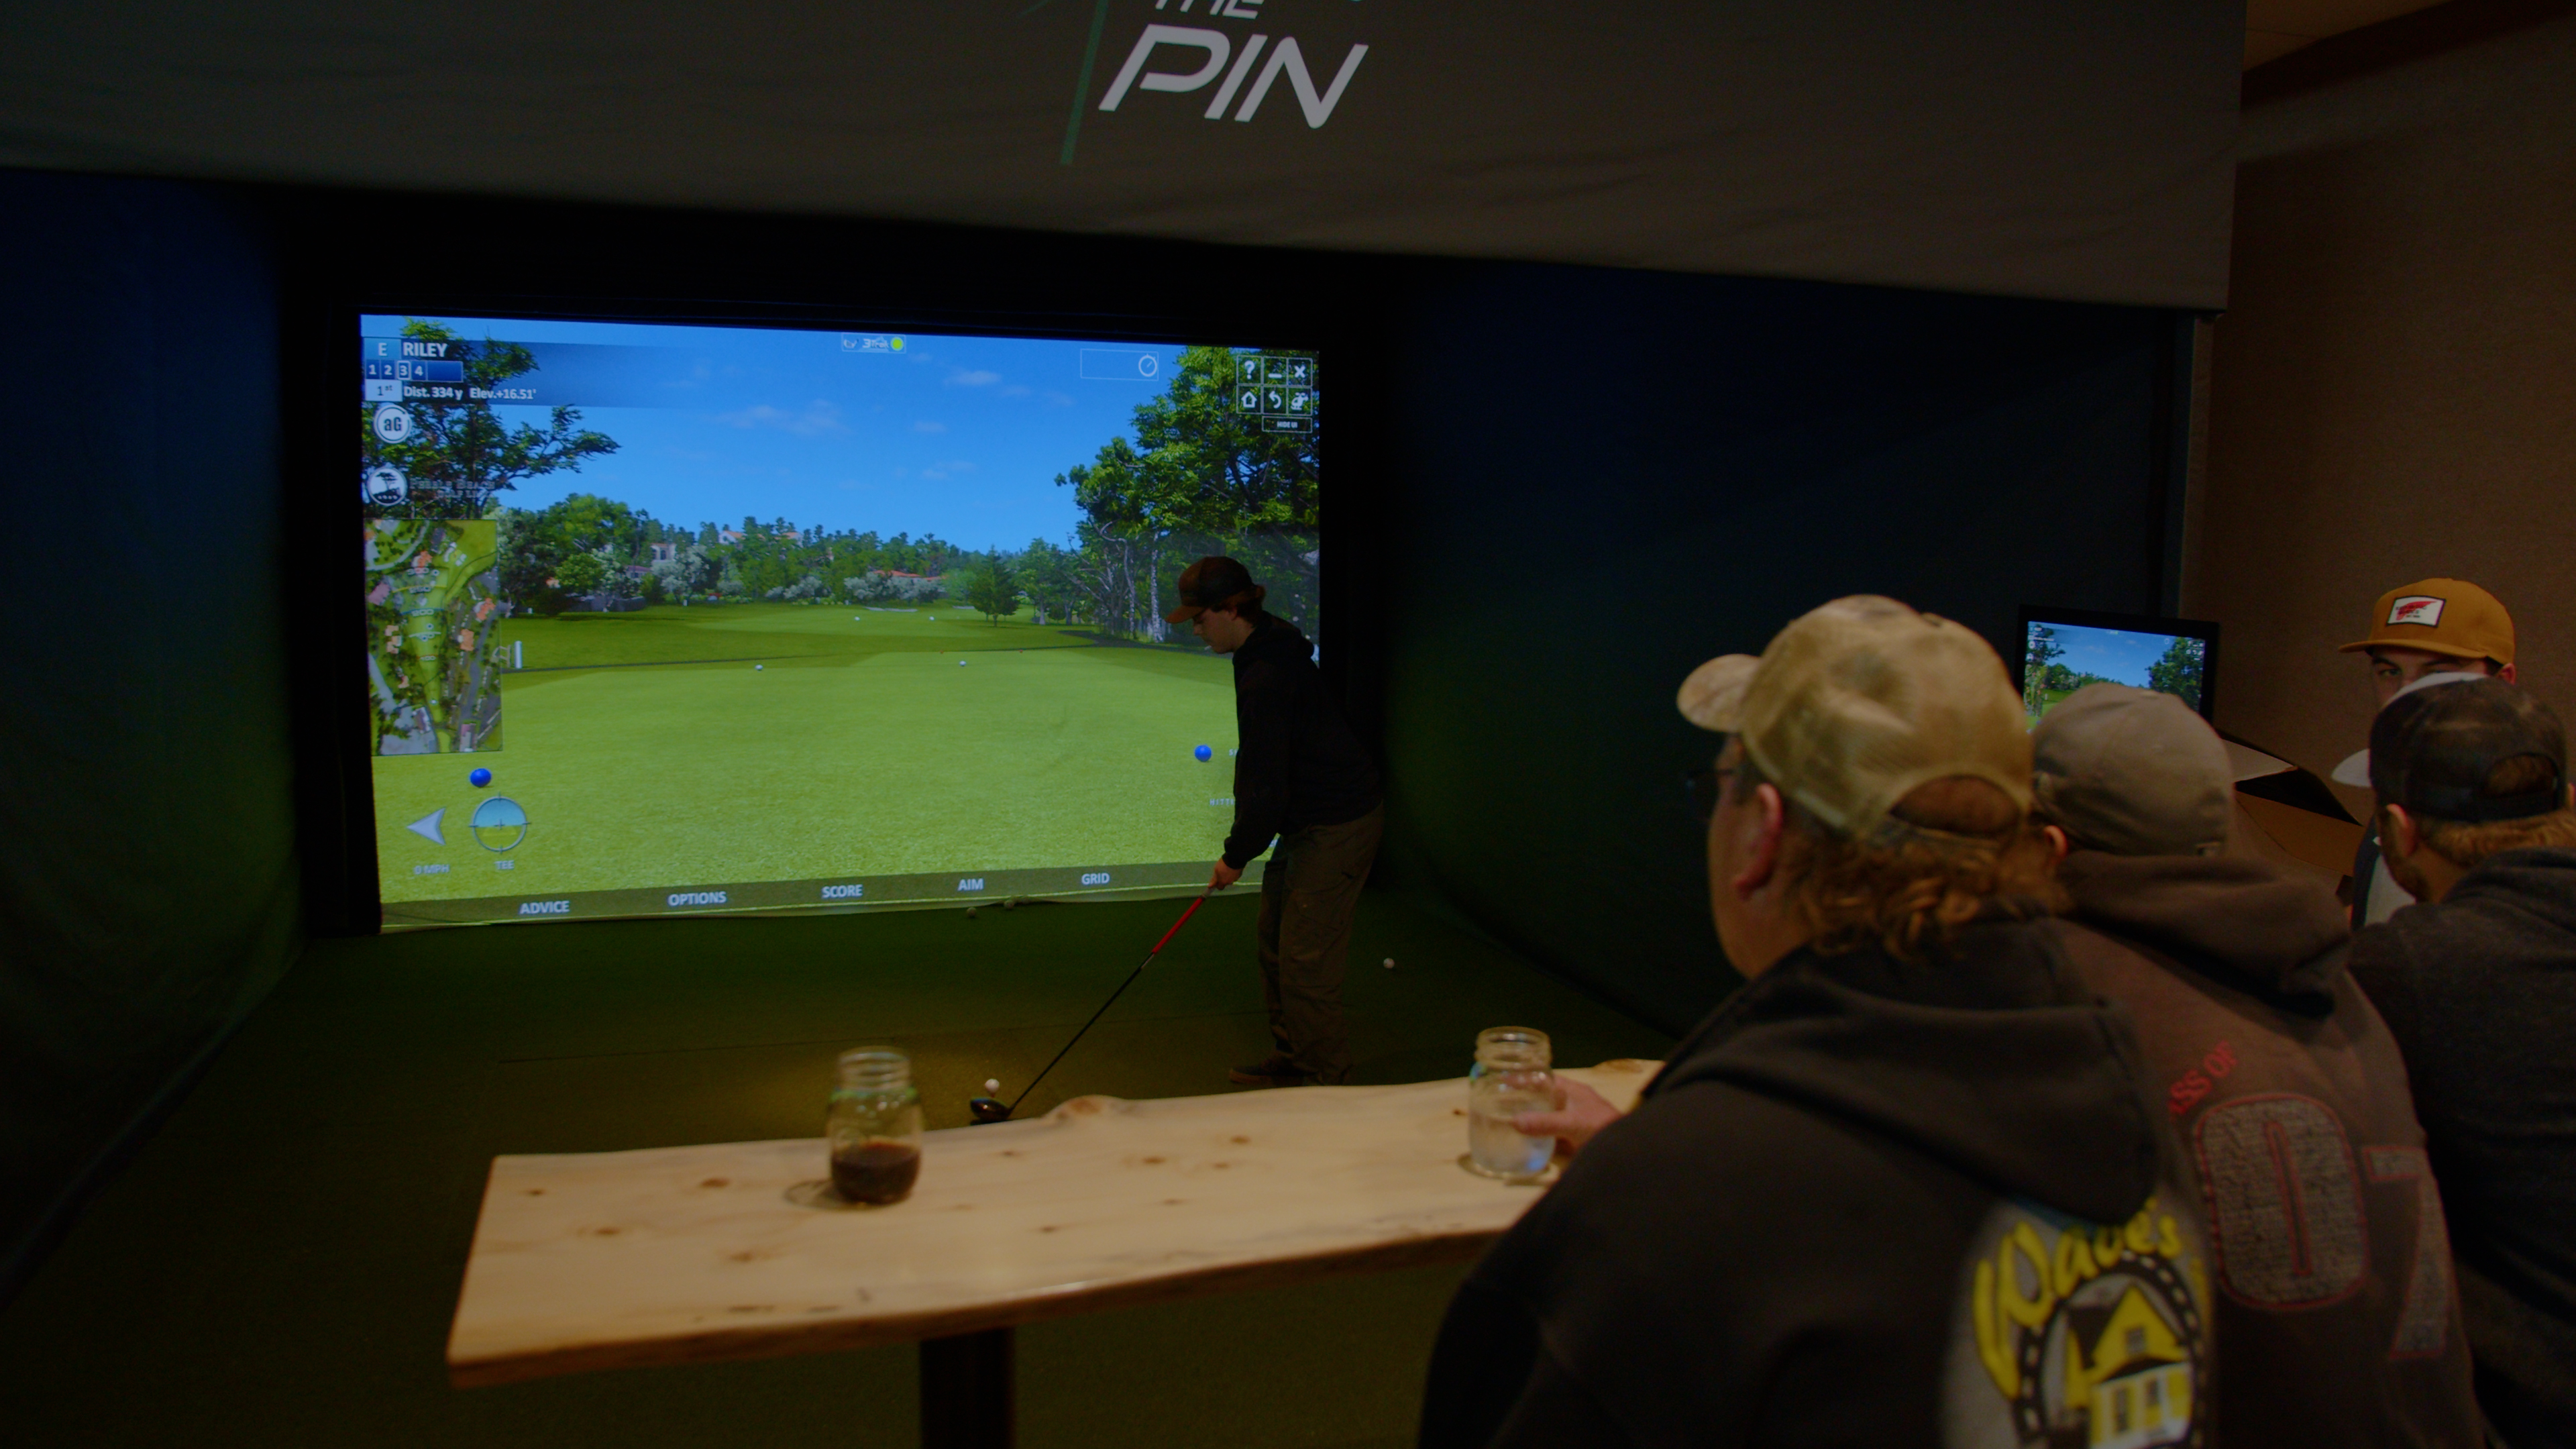 Enjoy a Night Out at The Pin in Taber, Alberta!